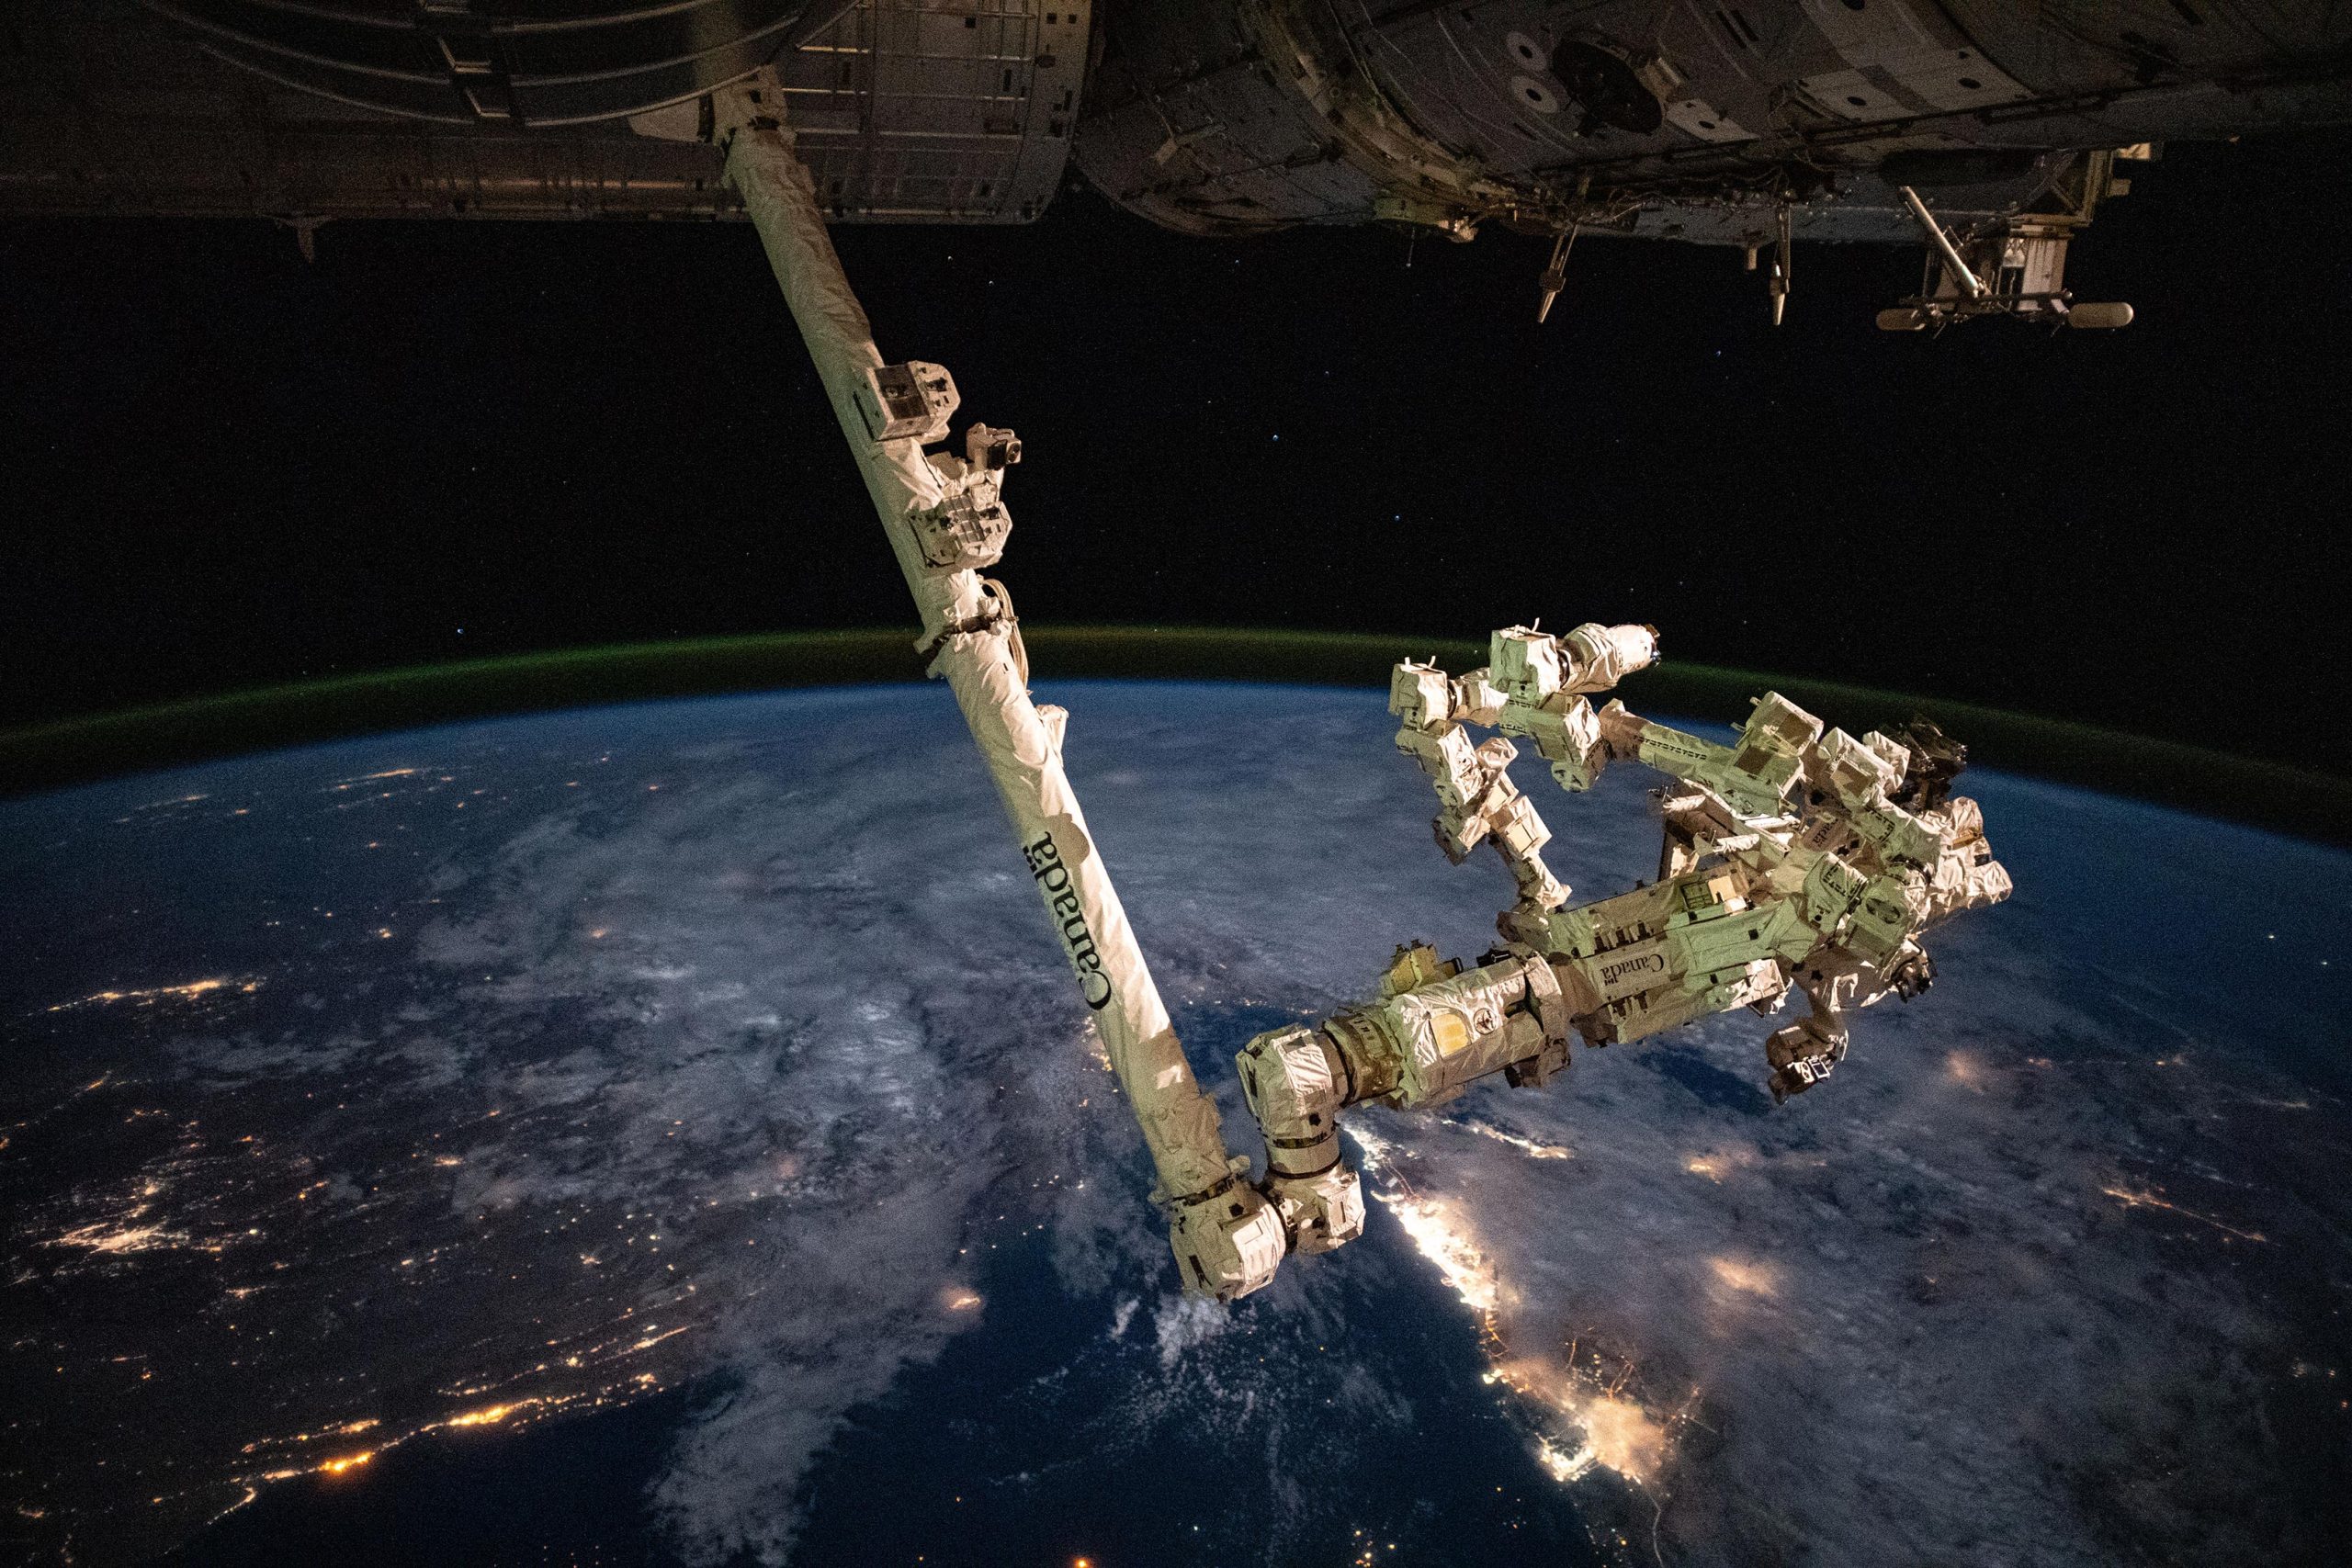 busy-bees-in-zero-g-spacesuits-science-and-cargo-ops-kick-off-week-on-iss